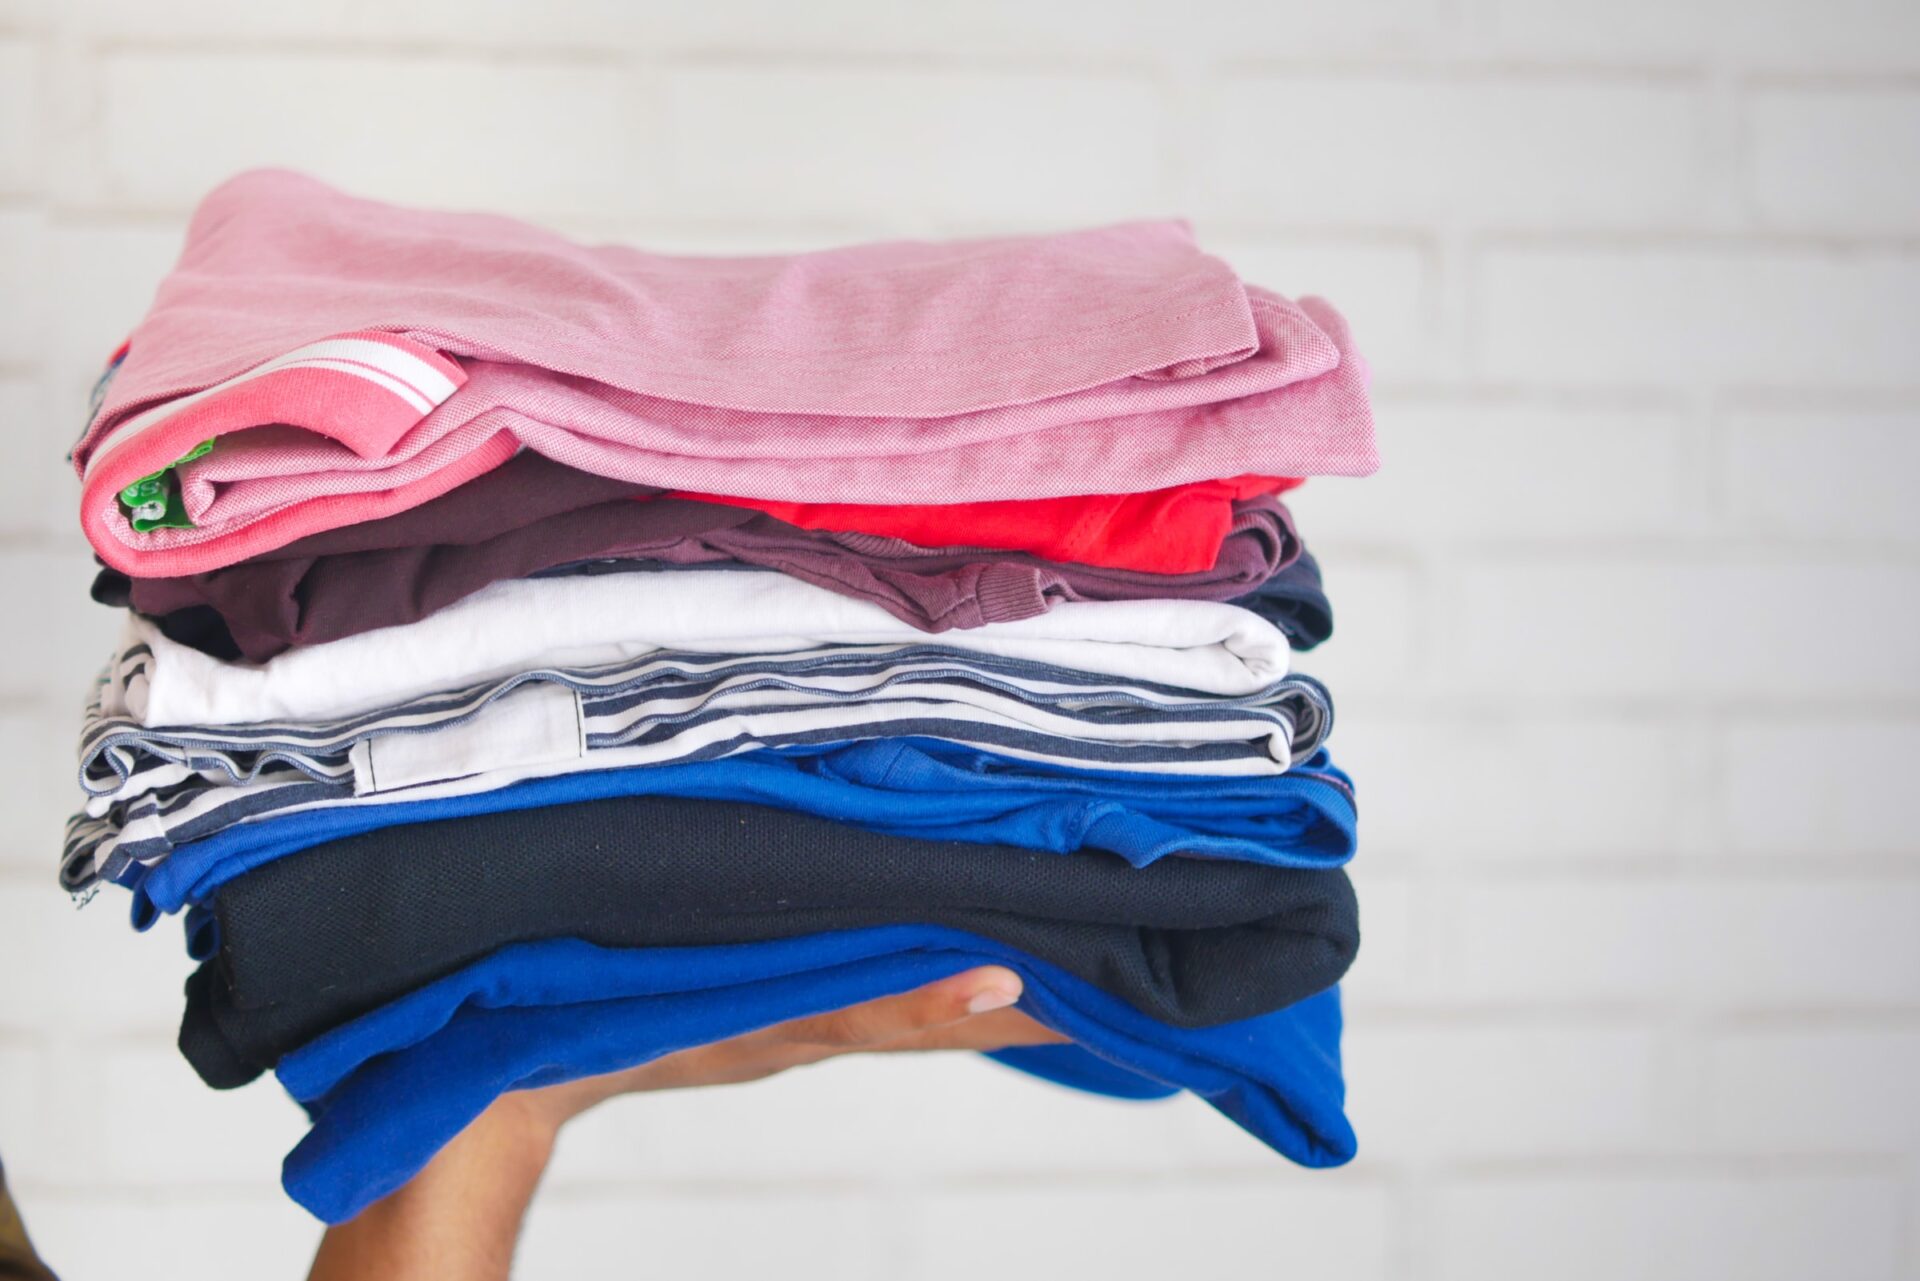 How to Get Dust Stains Out of Clothes